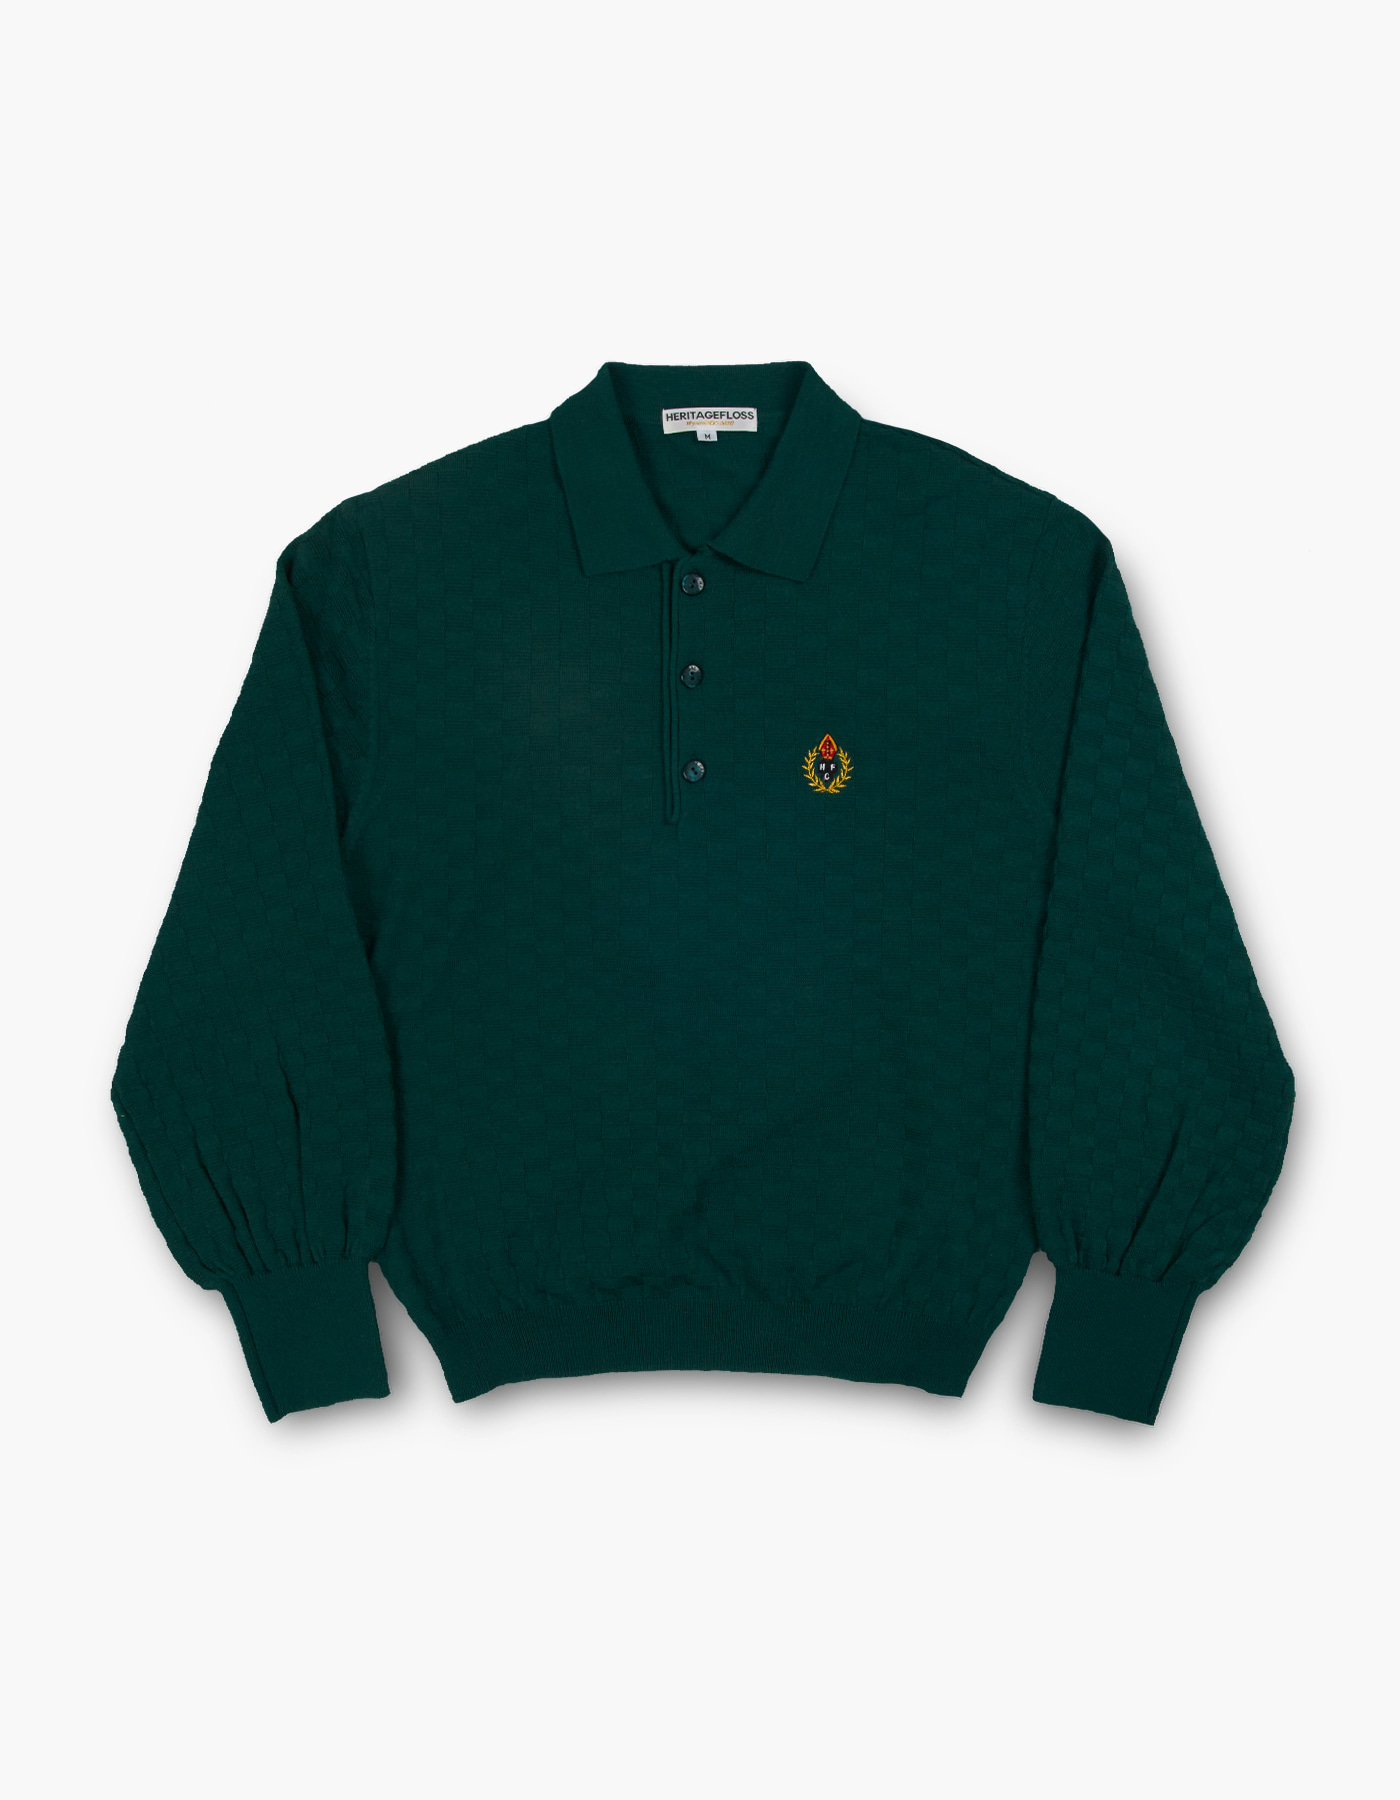 HFC CREST CHECKED POLO / GREEN